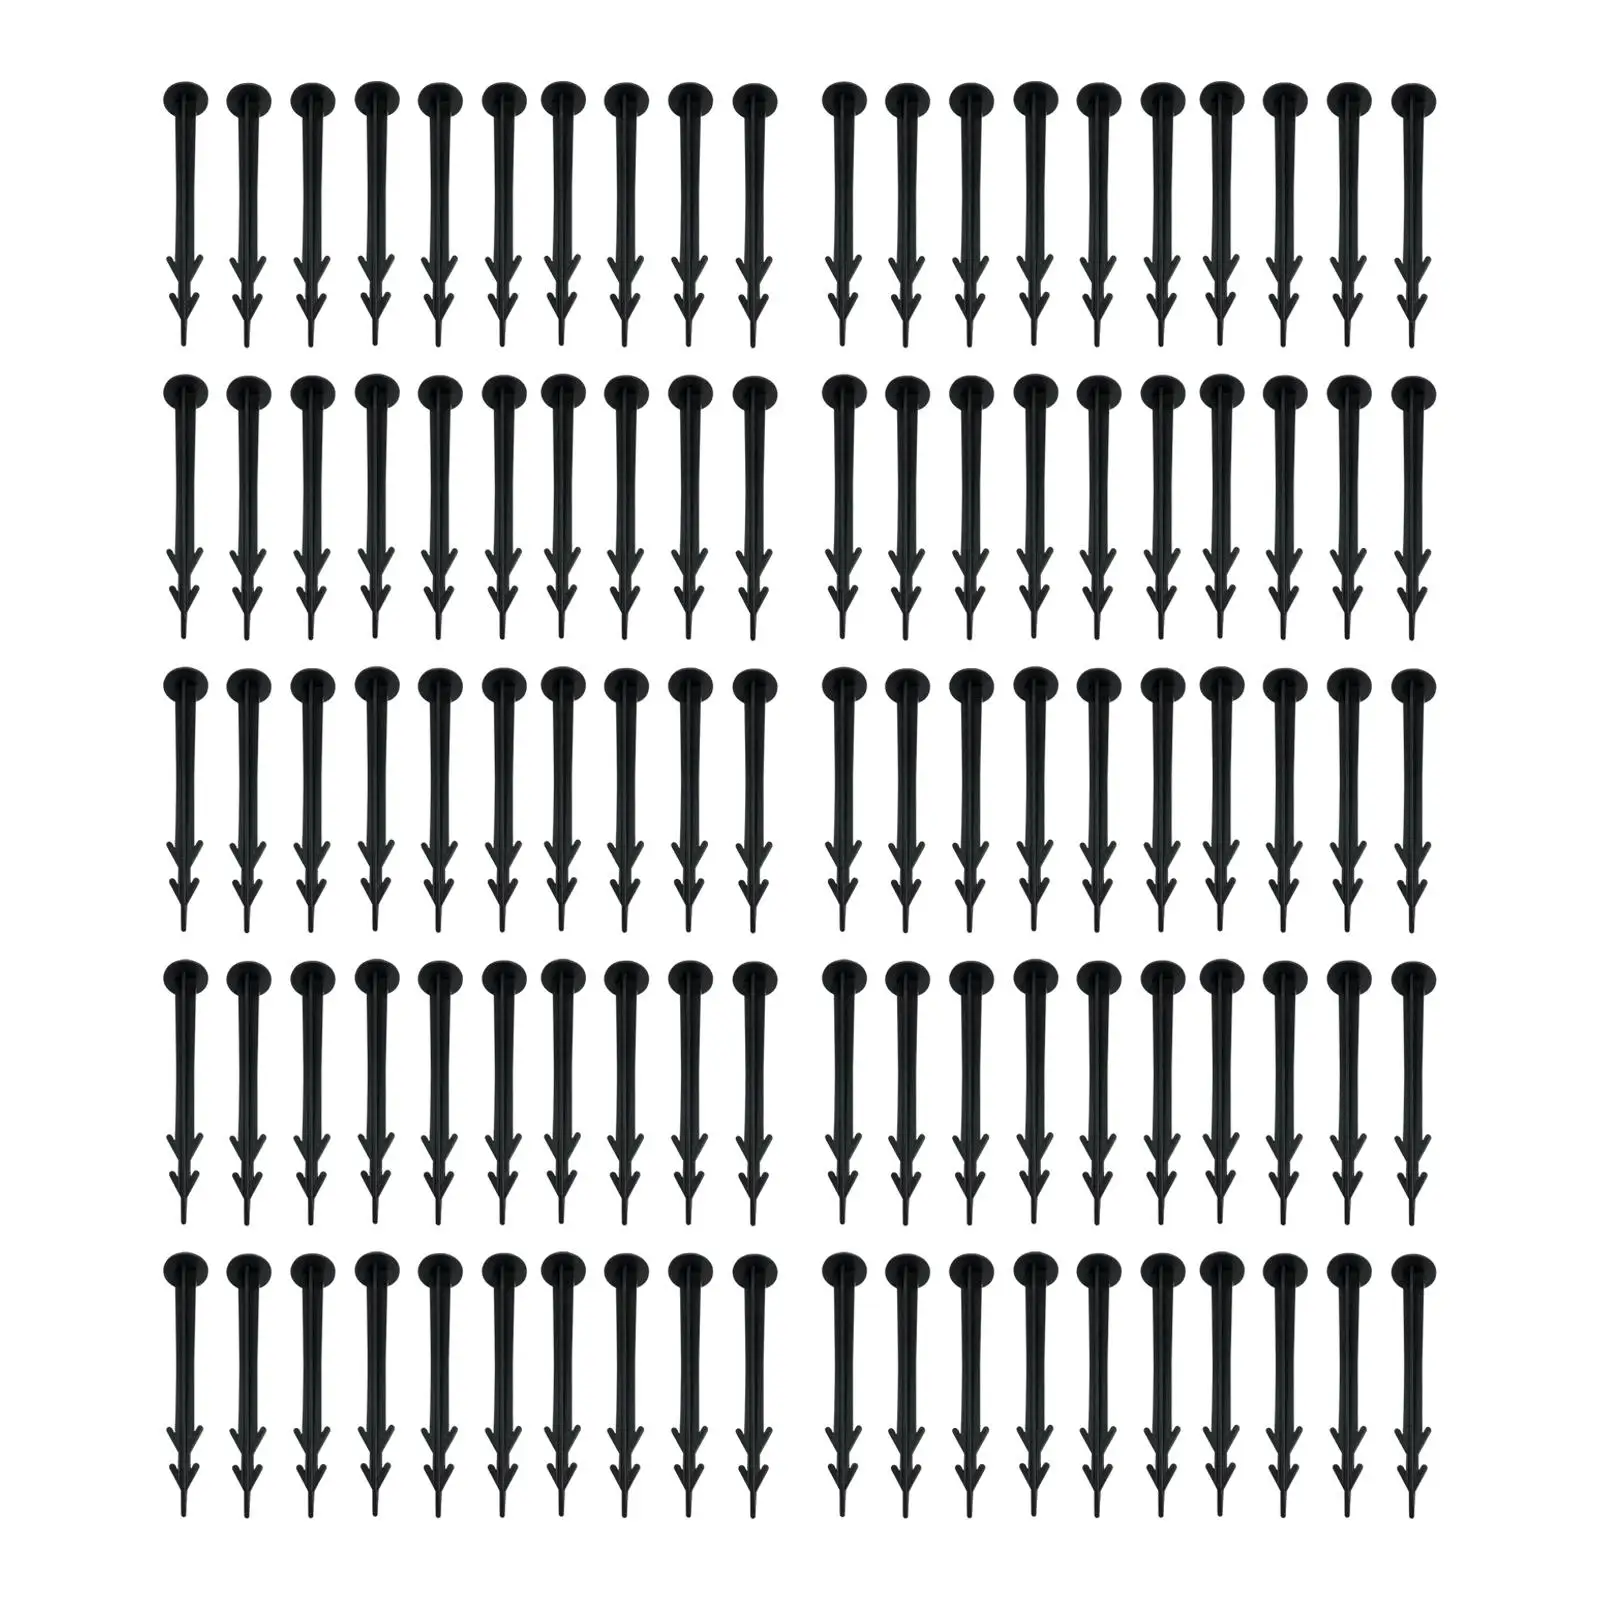 100Pcs Garden Stakes Landscape Nails Anchor Ground Stakes Fixing Anchor Pegs for Fabric Lawn Edging Keeping Garden Netting Down